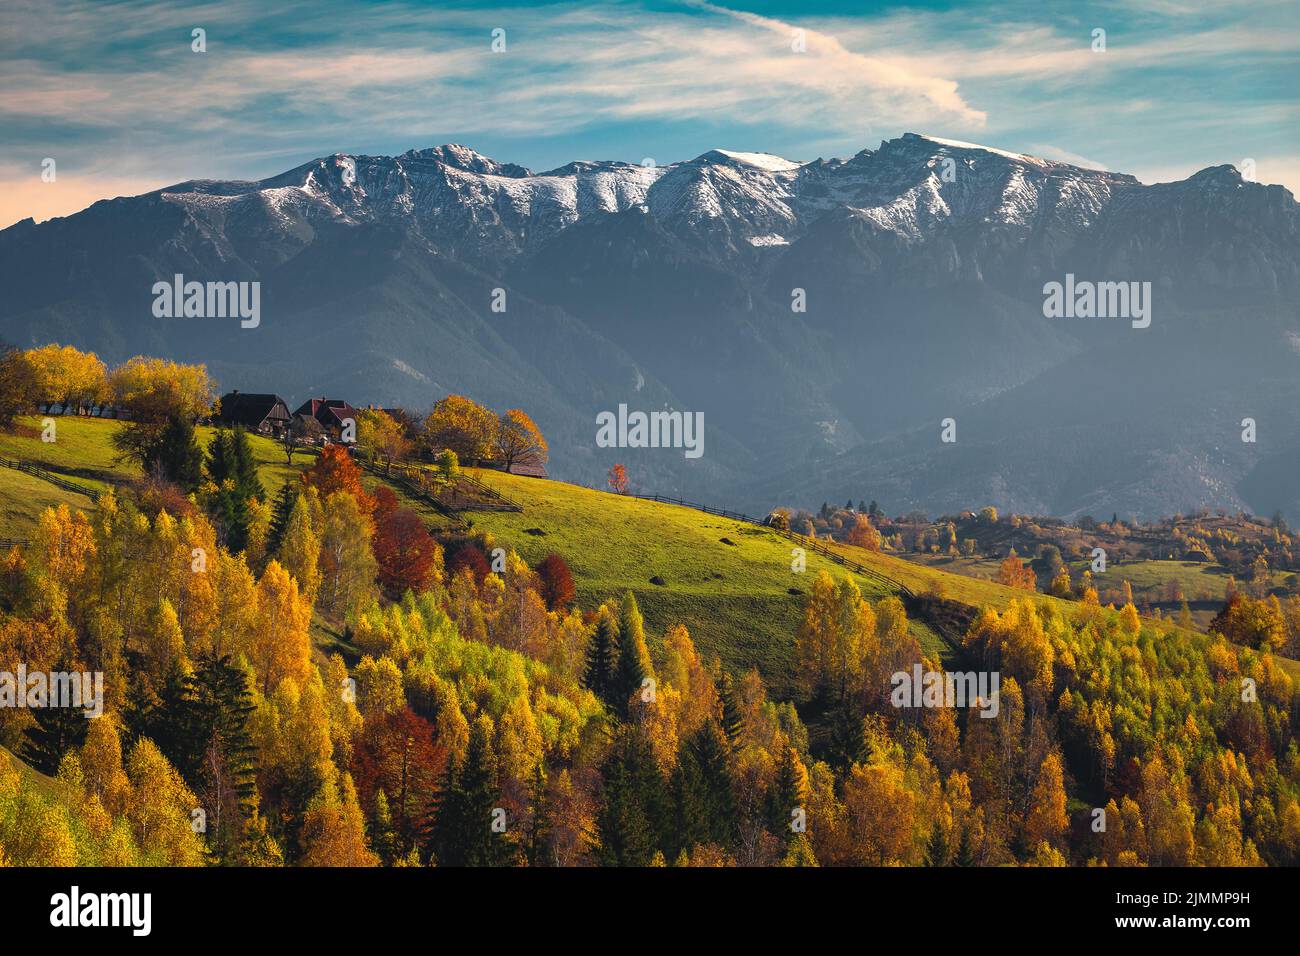 Wonderful autumn rural scenery and colorful birch trees on the hills. Colorful autumn forest on the slope and snowy mountains in background, Carpathia Stock Photo